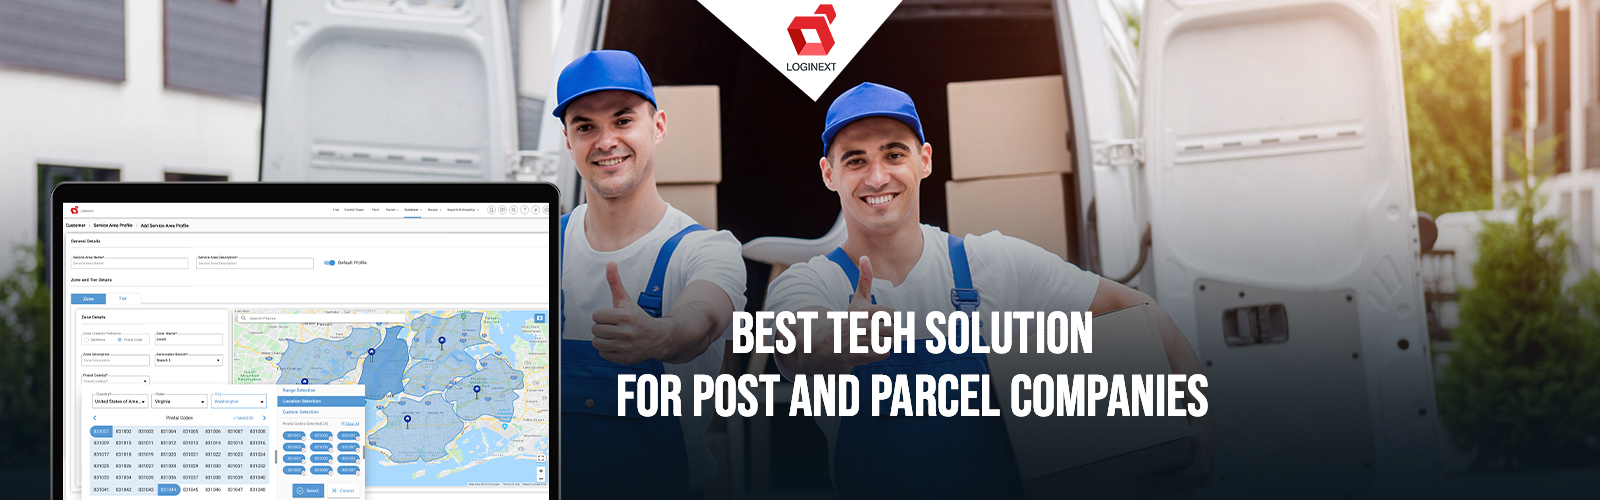 Best Tech Solution for Post and Parcel Delivery Companies